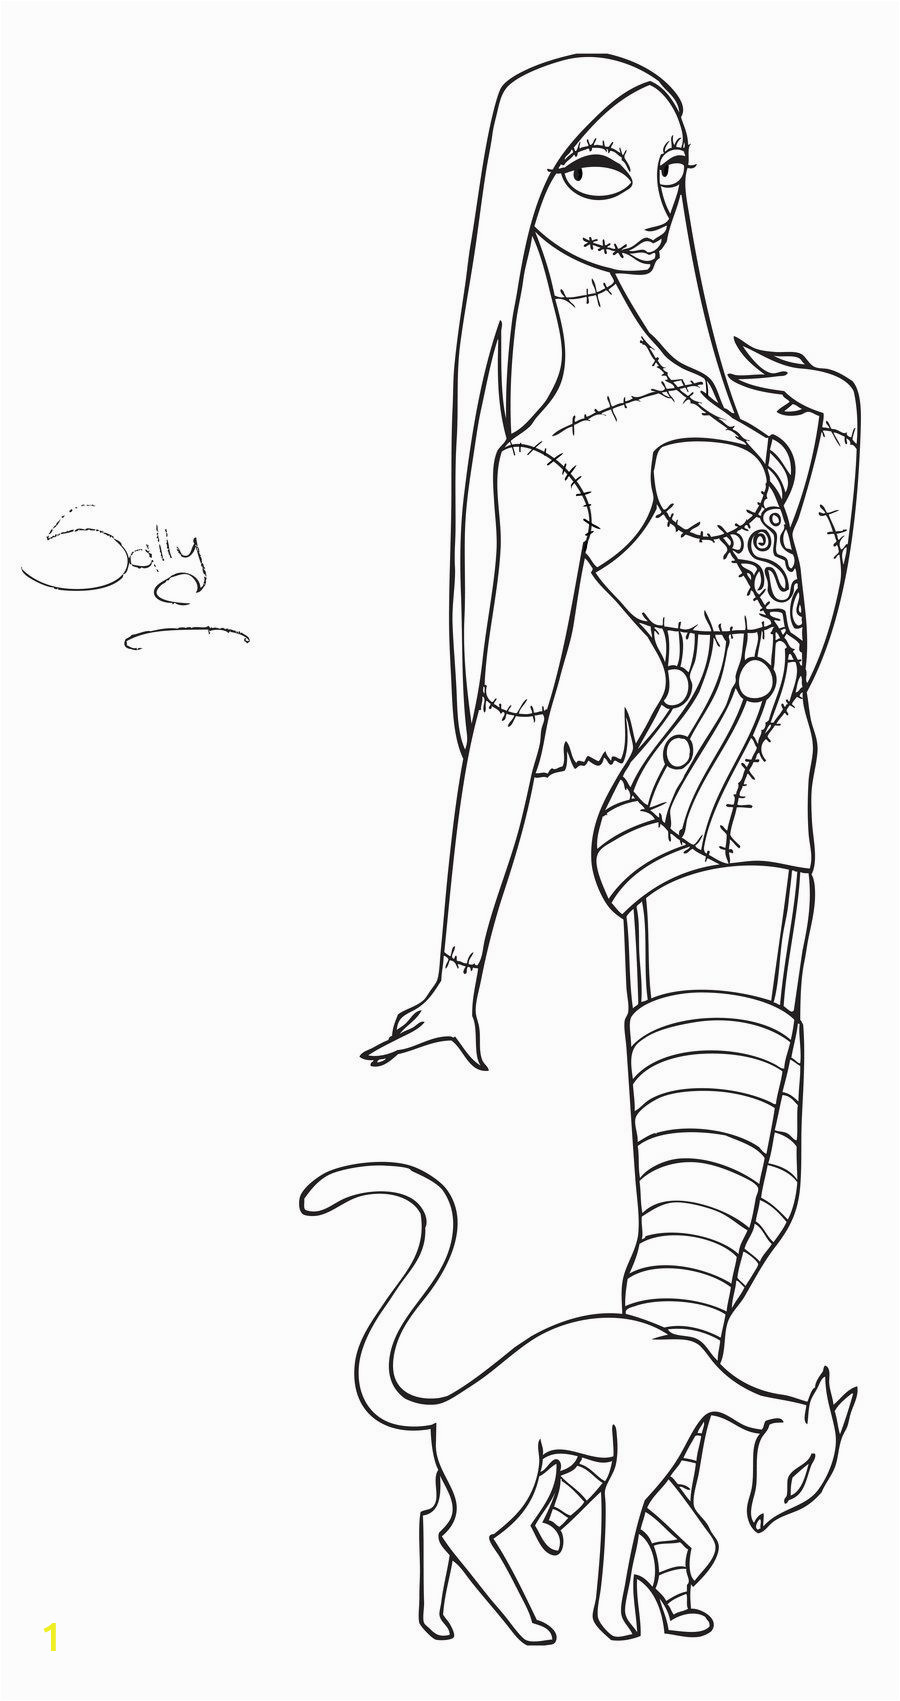 Sally Nightmare before Christmas Coloring Pages Nightmare before Christmas Sally Coloring Page